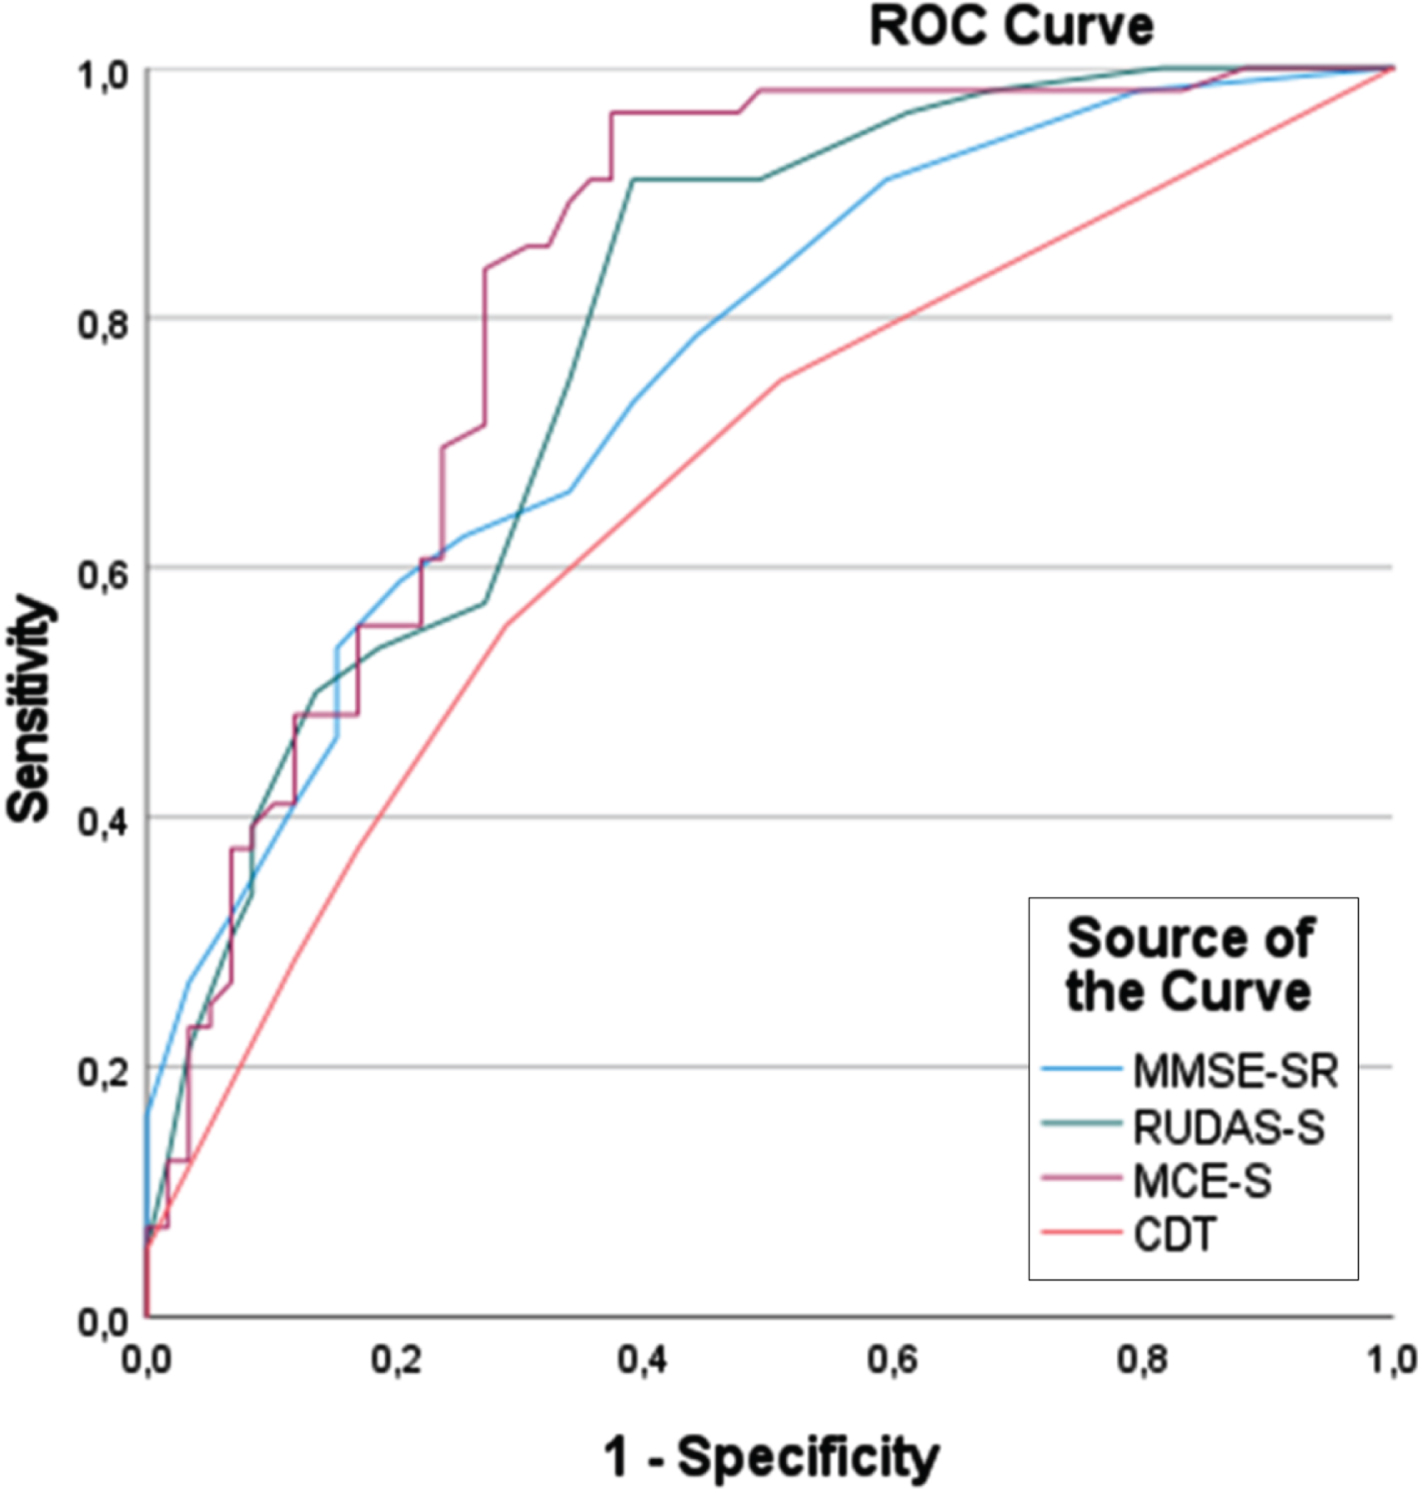 ROC curve analysis of the MCE-S, RUDAS-S, MMSE-S, and CDT for detecting dementia (N = 115). MCE-S, Swedish version of the Multicultural Cognitive Examination; RUDAS-S, Swedish version of the Rowland Universal Dementia Assessment Scale; MMSE-SR, Swedish version of the Mini Mental Scale Examination; CDT, Clock Drawing Test.